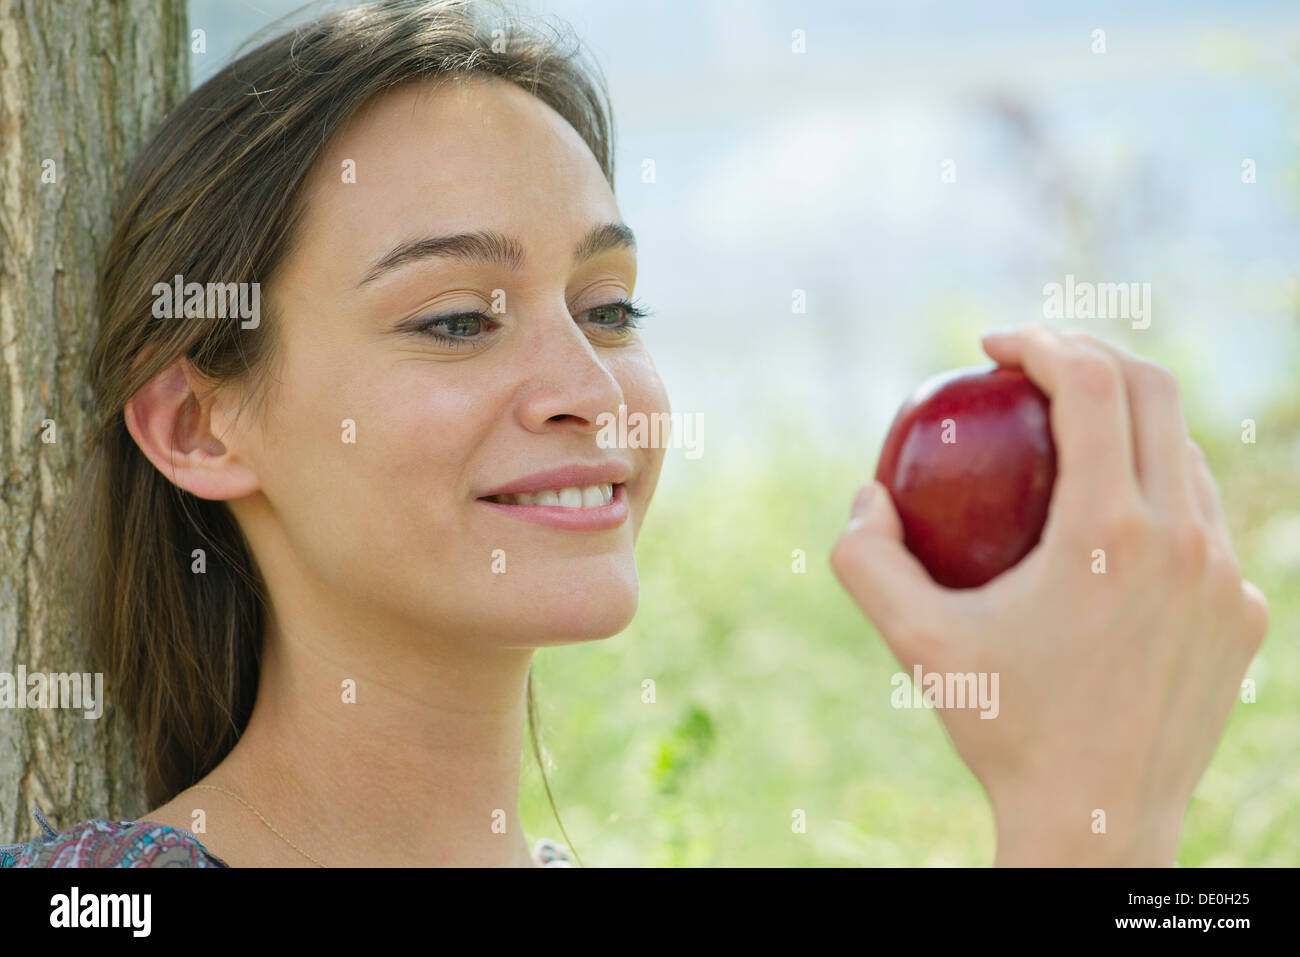 Woman sitting outdoors with apple Stock Photo